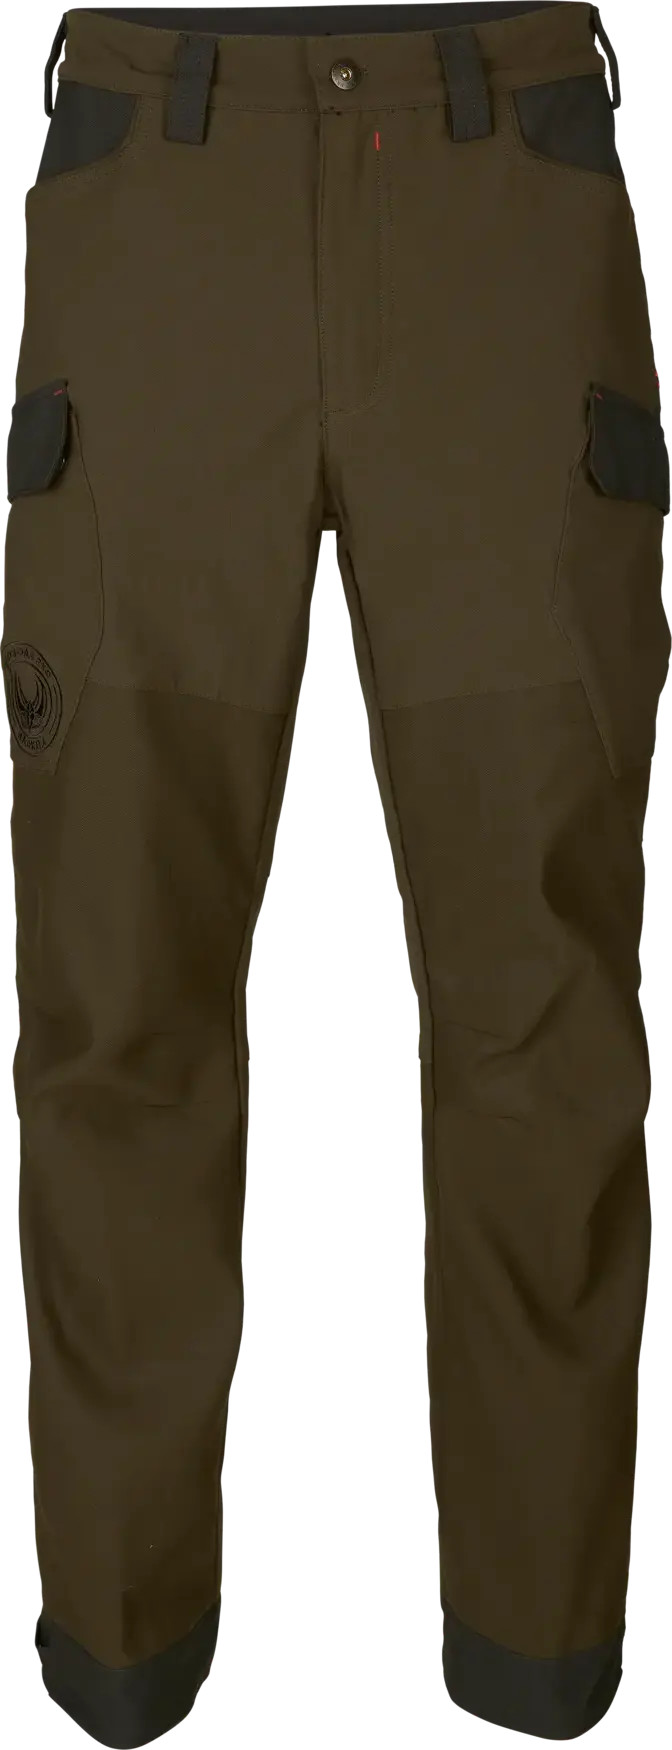 Men’s Wildboar Pro Move Trousers Willow green